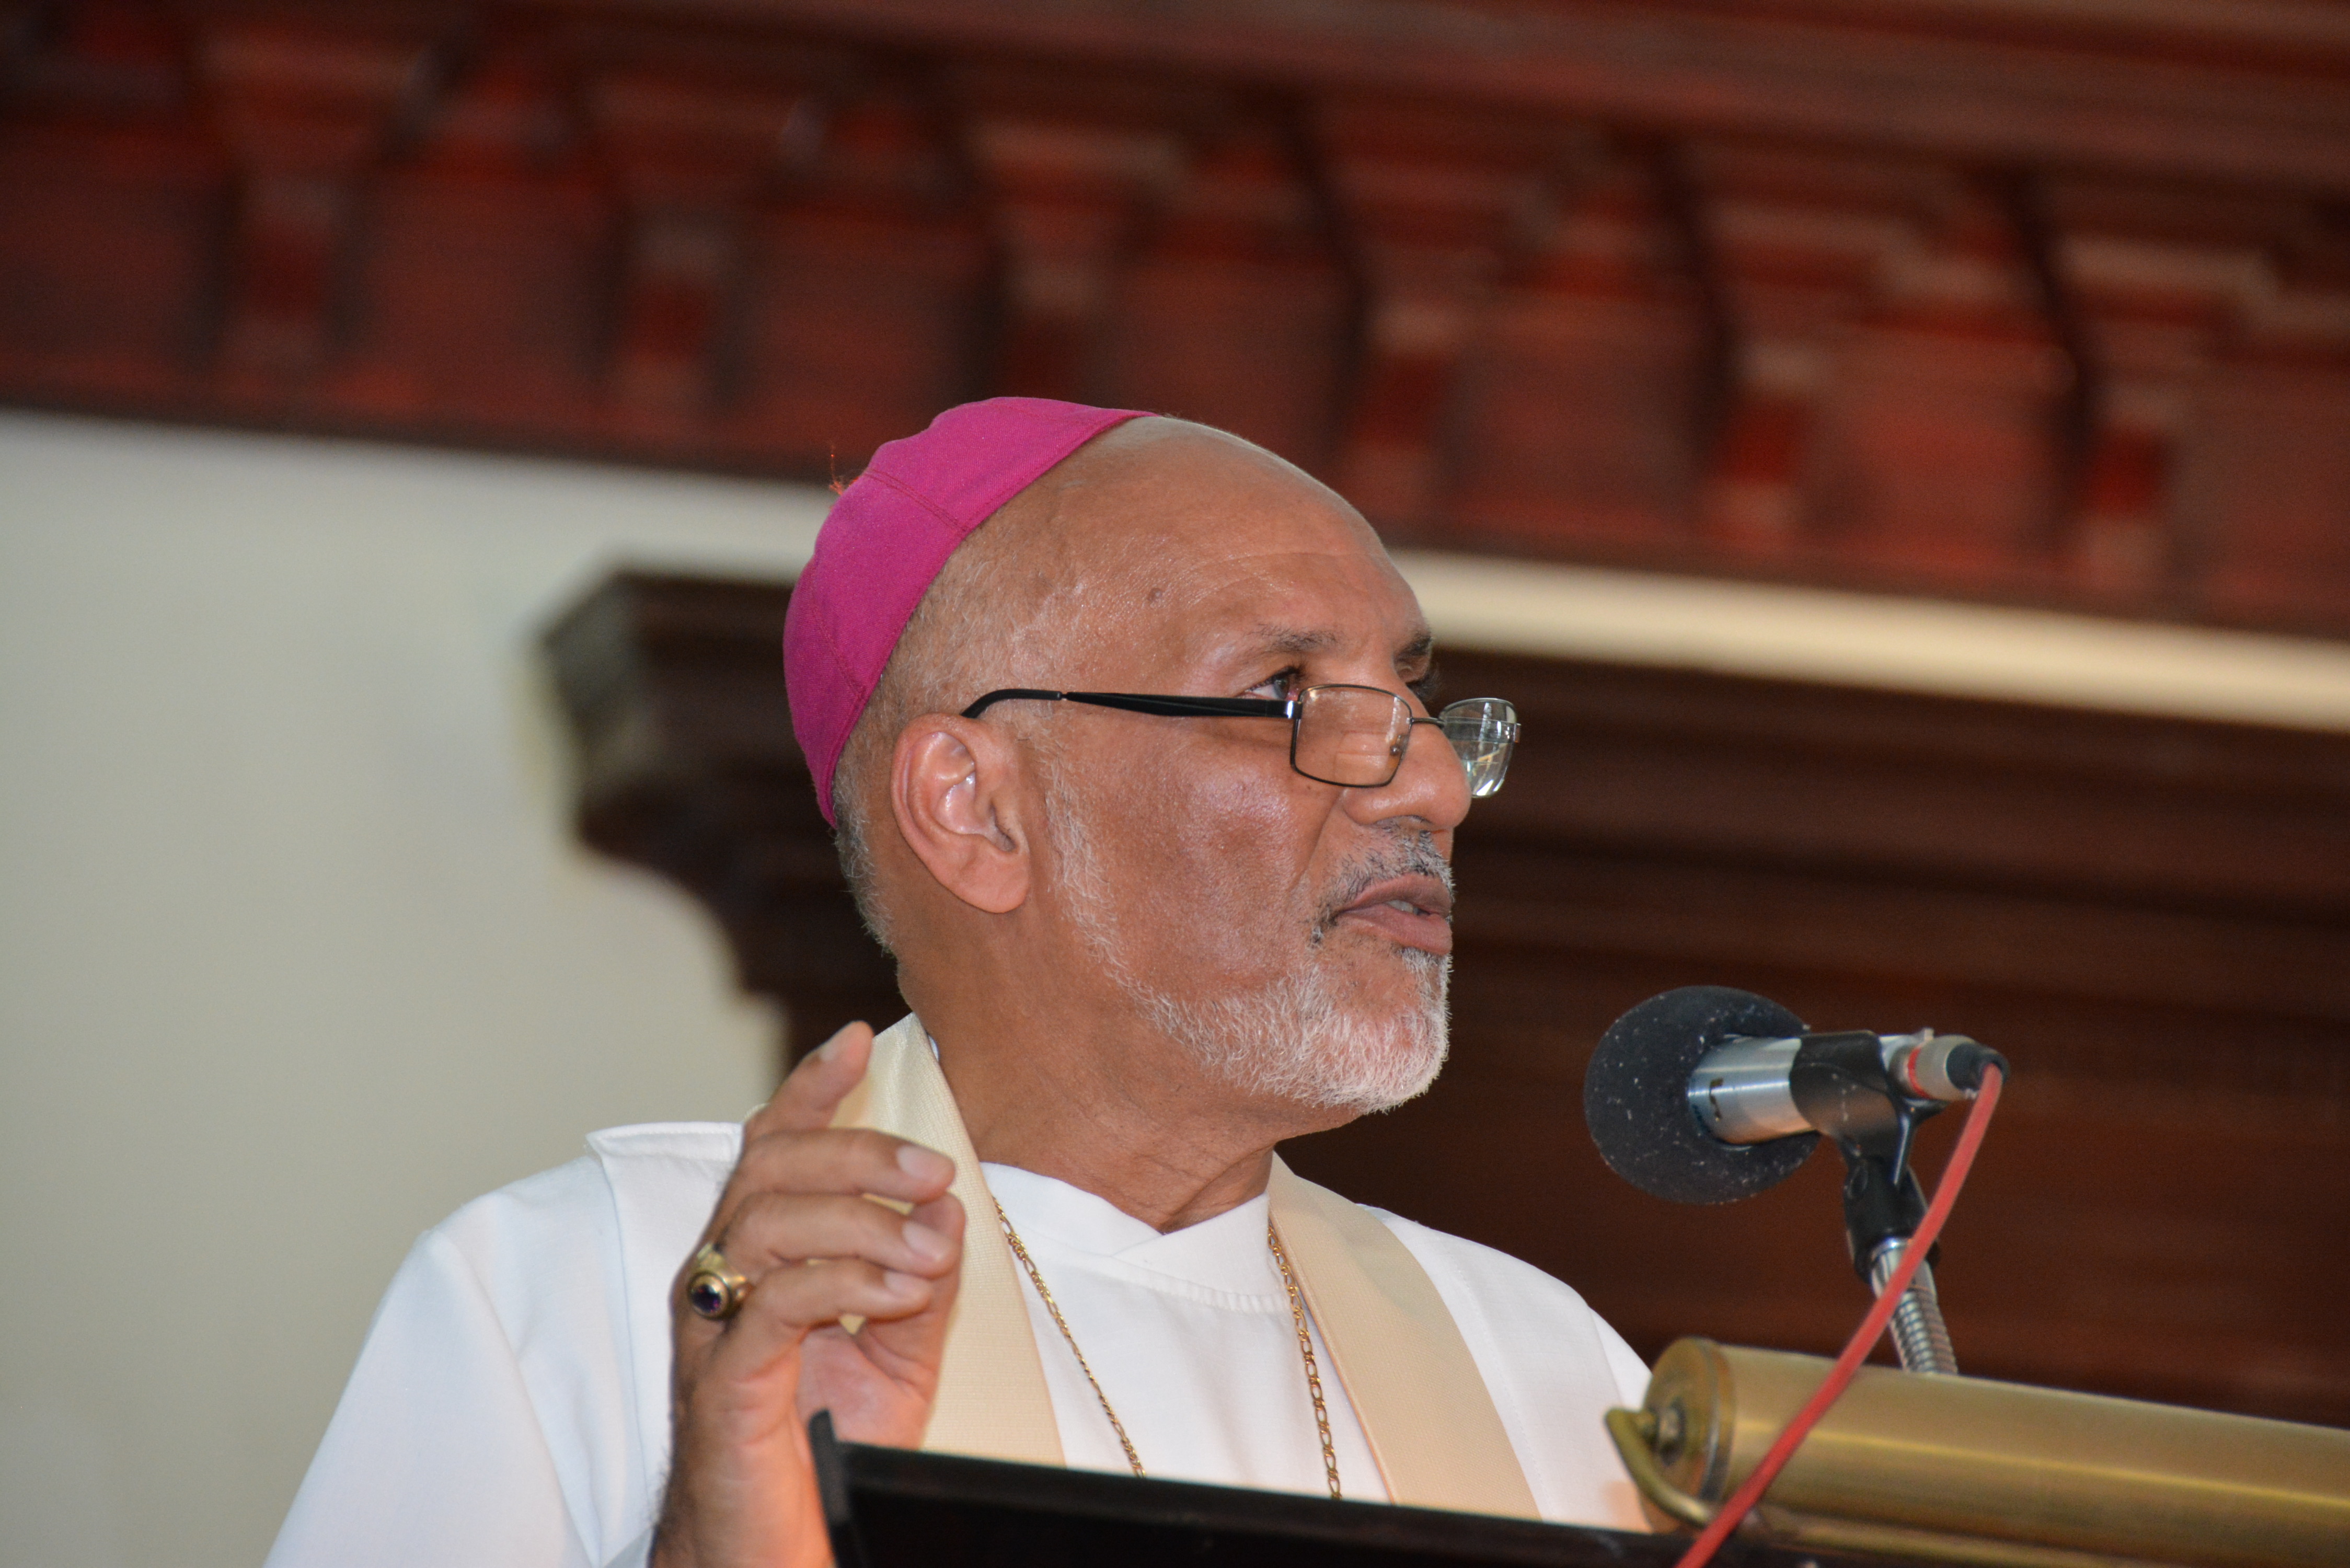 Synod Charge delivered by the Rt. Rev. Dr. Howard Gregory, Bishop of Jamaica and The Cayman Islands, at the Opening Service of the 145th Synod of the Church in Jamaica and the Cayman Islands (Anglican), held in the St. James’ Parish Church, on Tuesday April 7, 2015